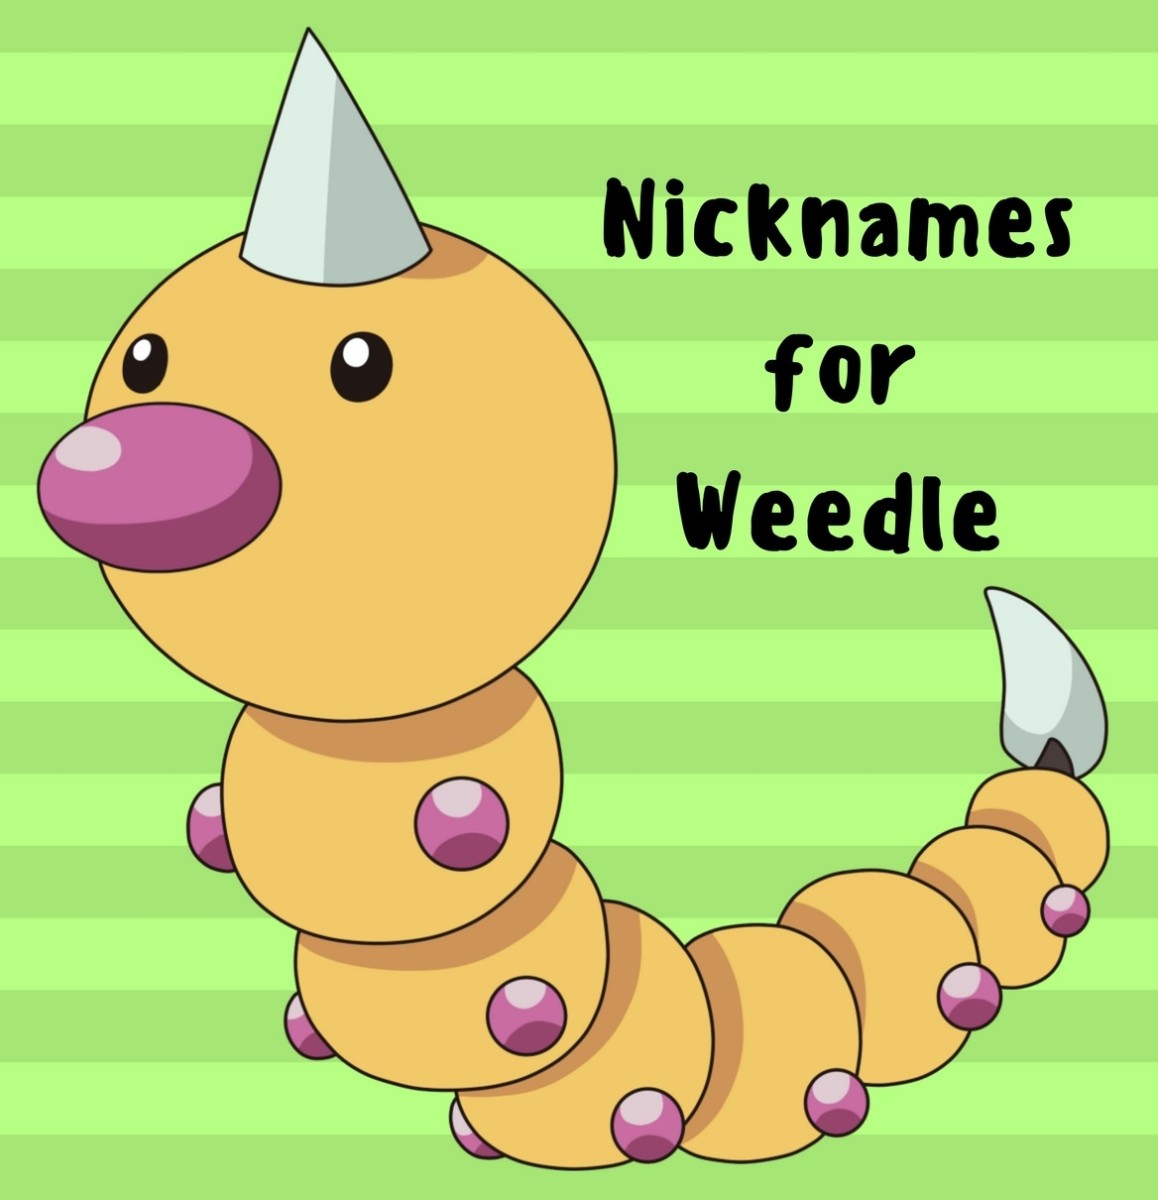 Nicknames for Weedle